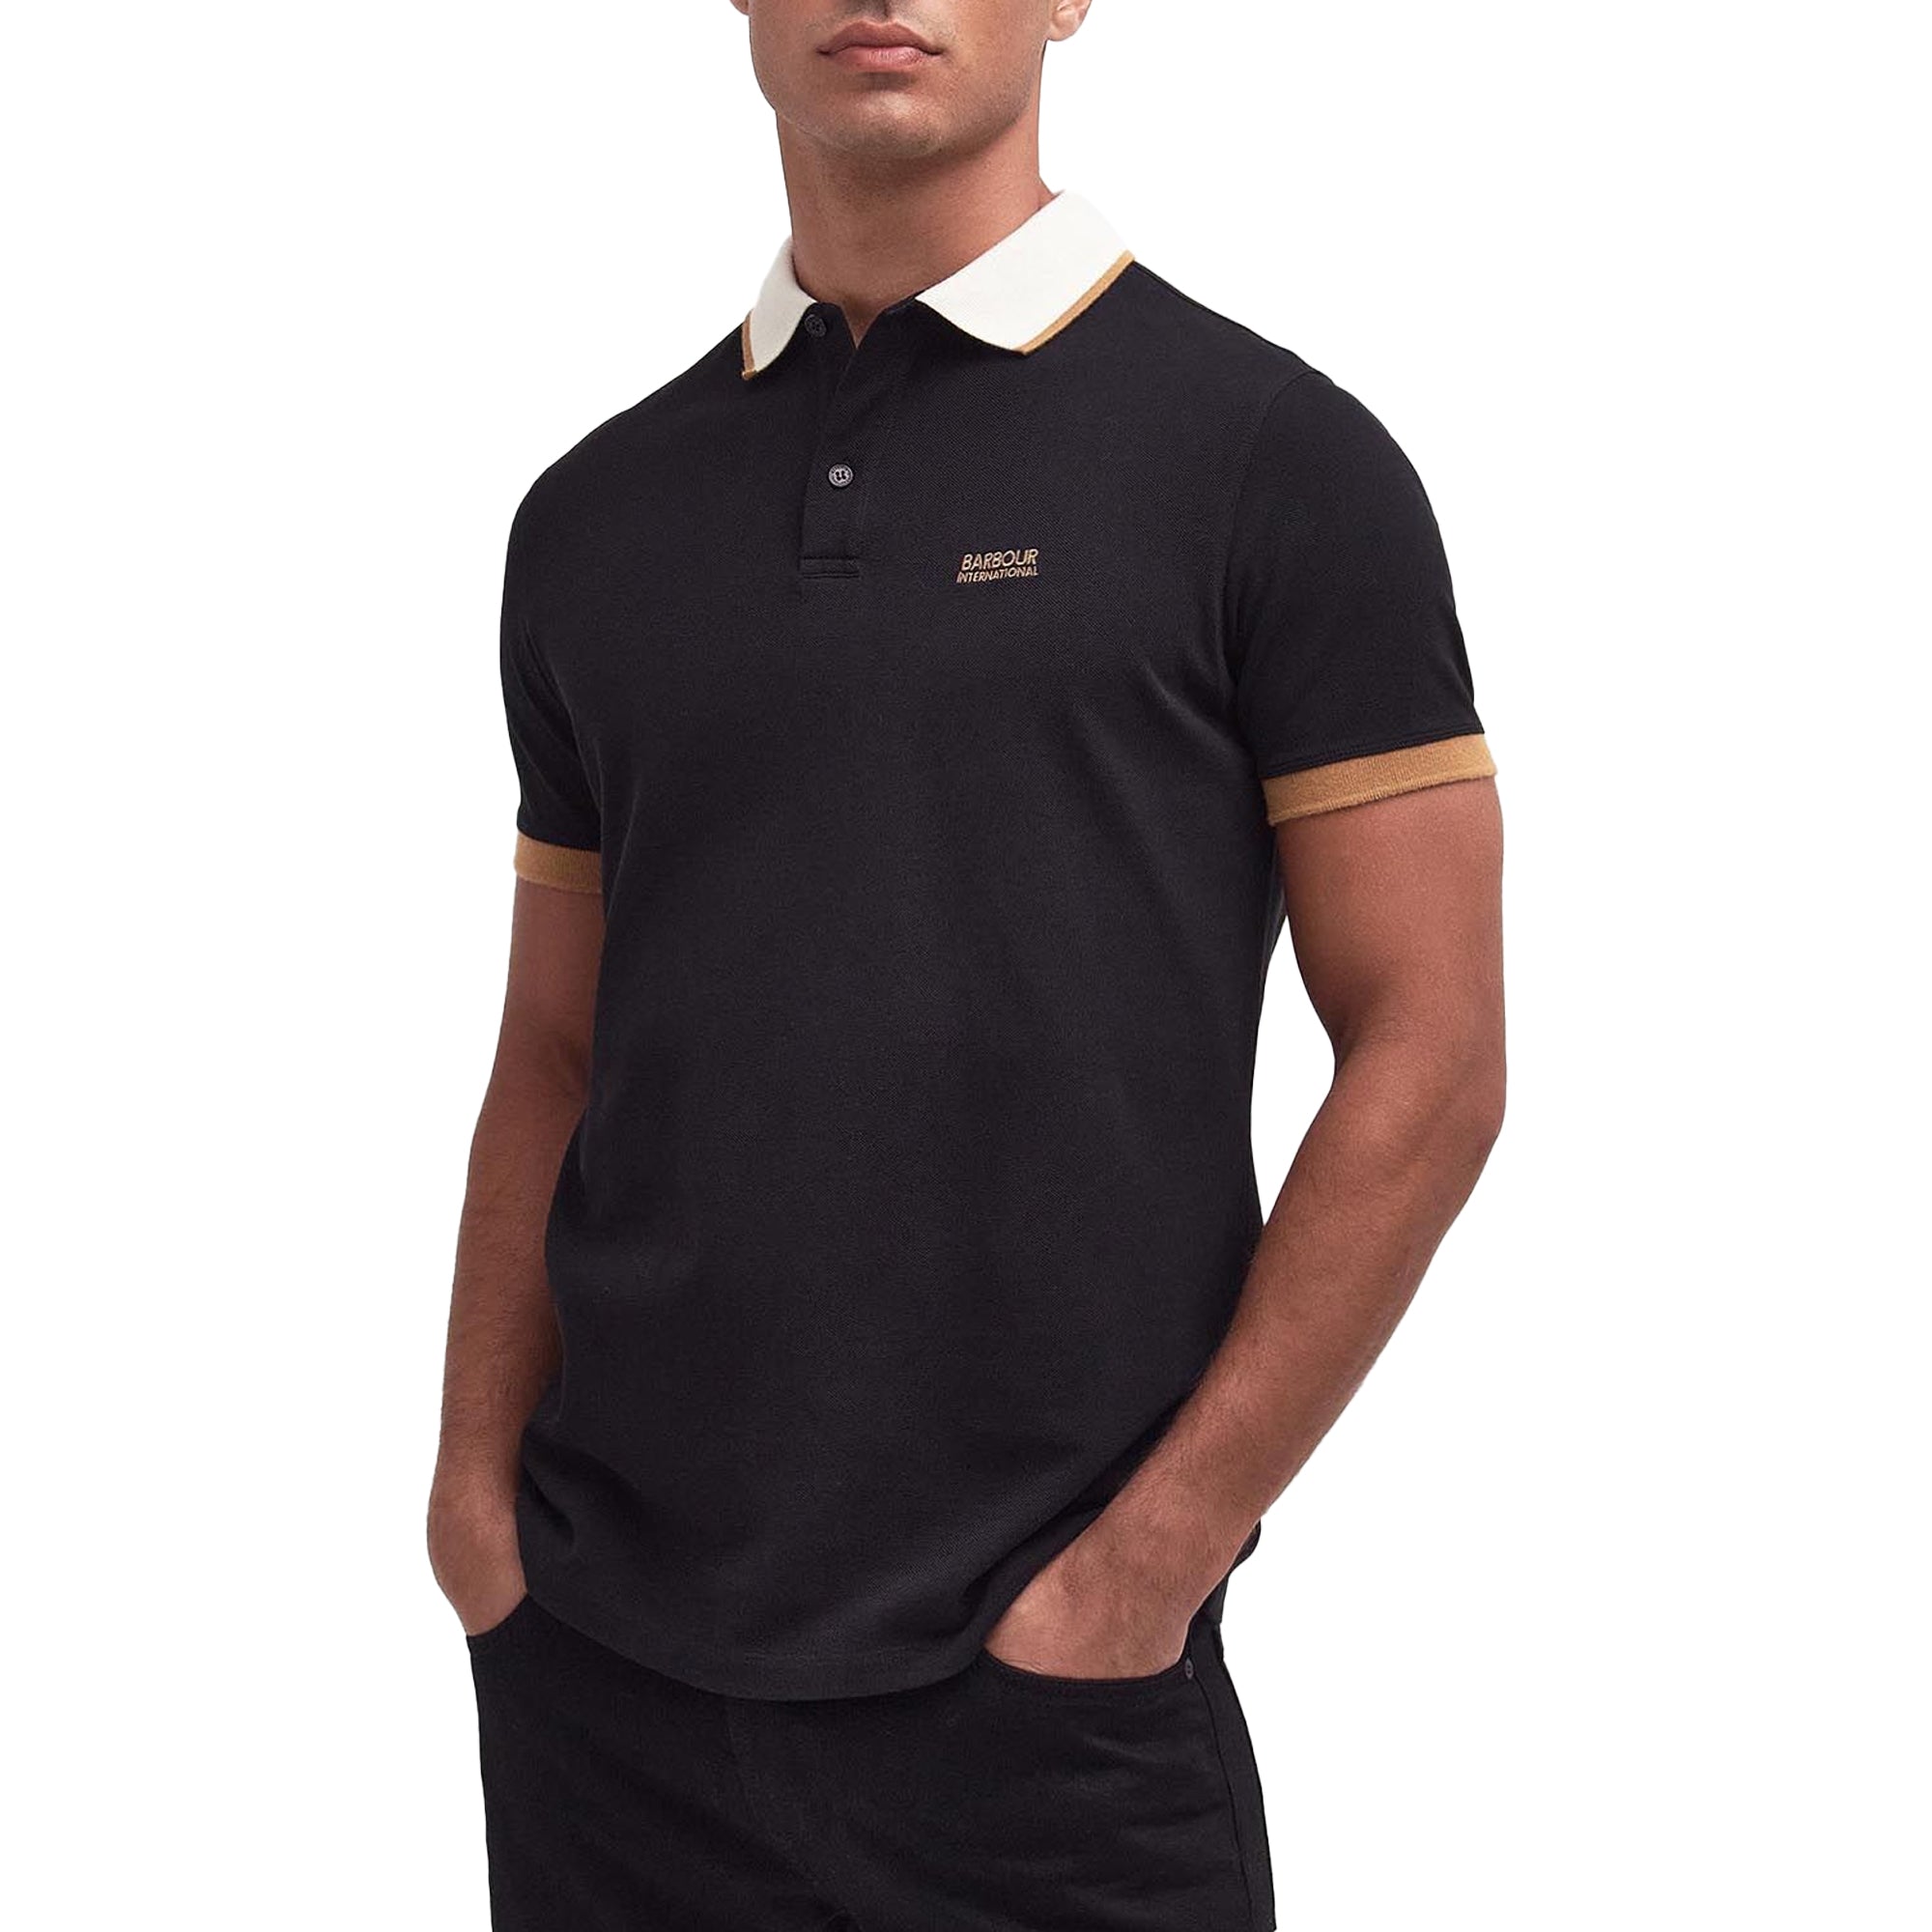 Barbour International Howall Polo - Black